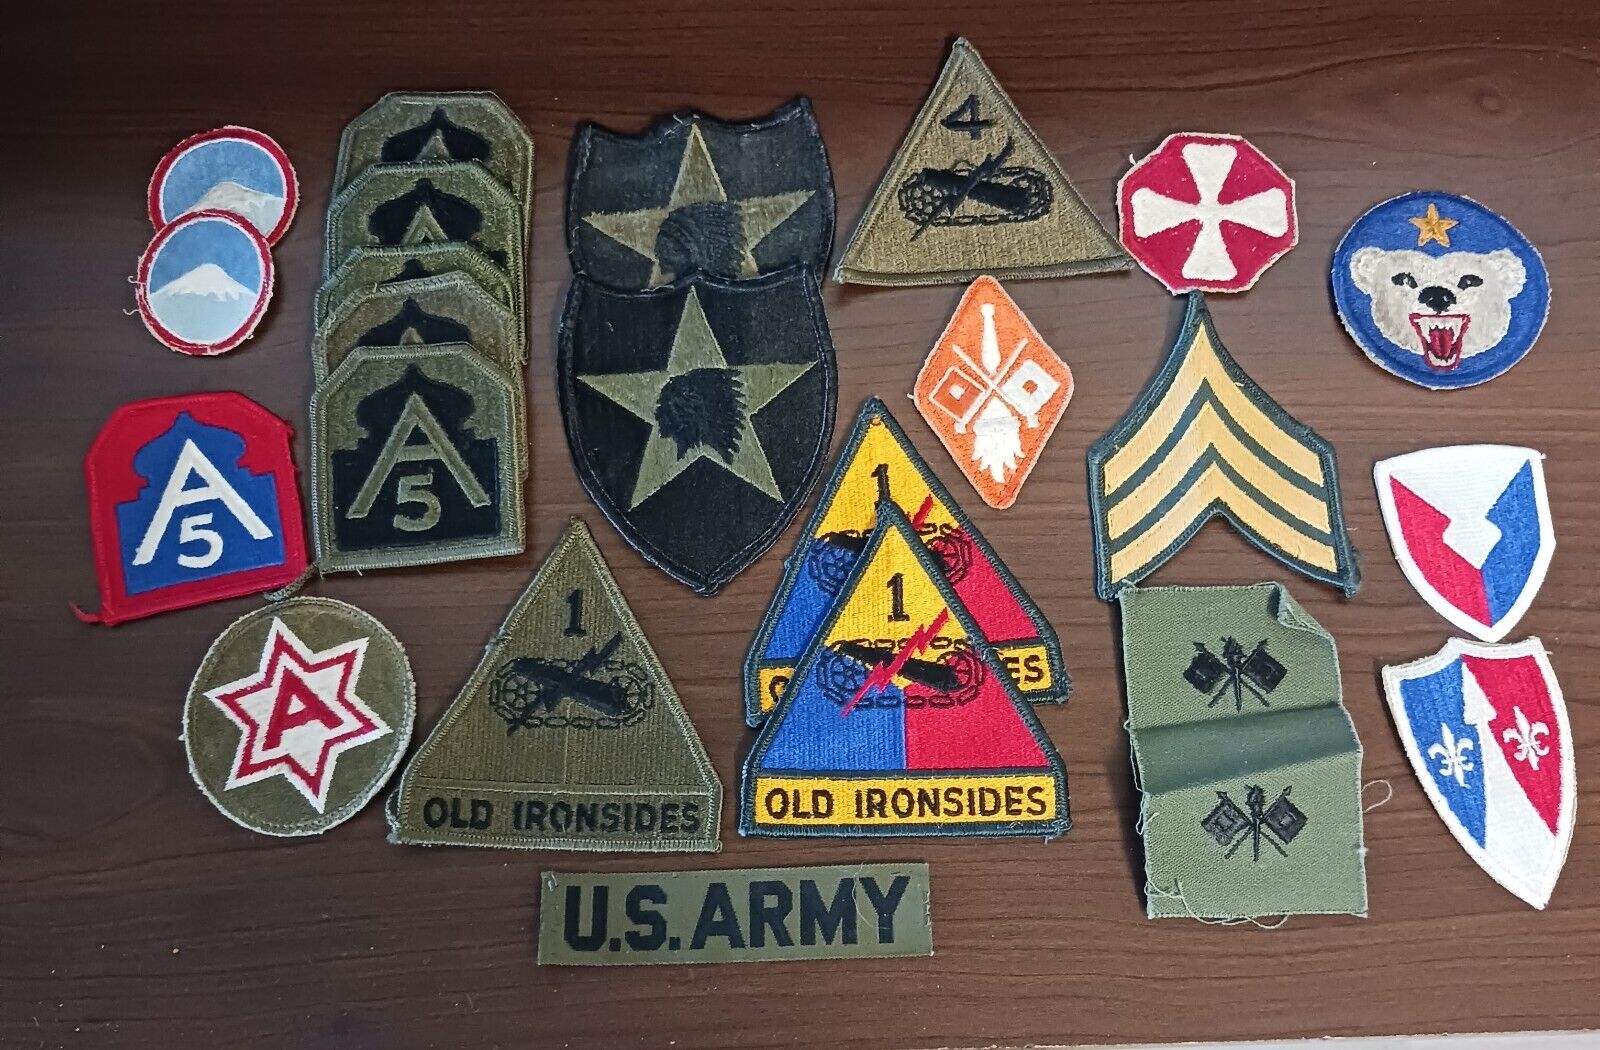 Vintage US Army Patch Lot  23 Pieces 16 Different - New and Worn